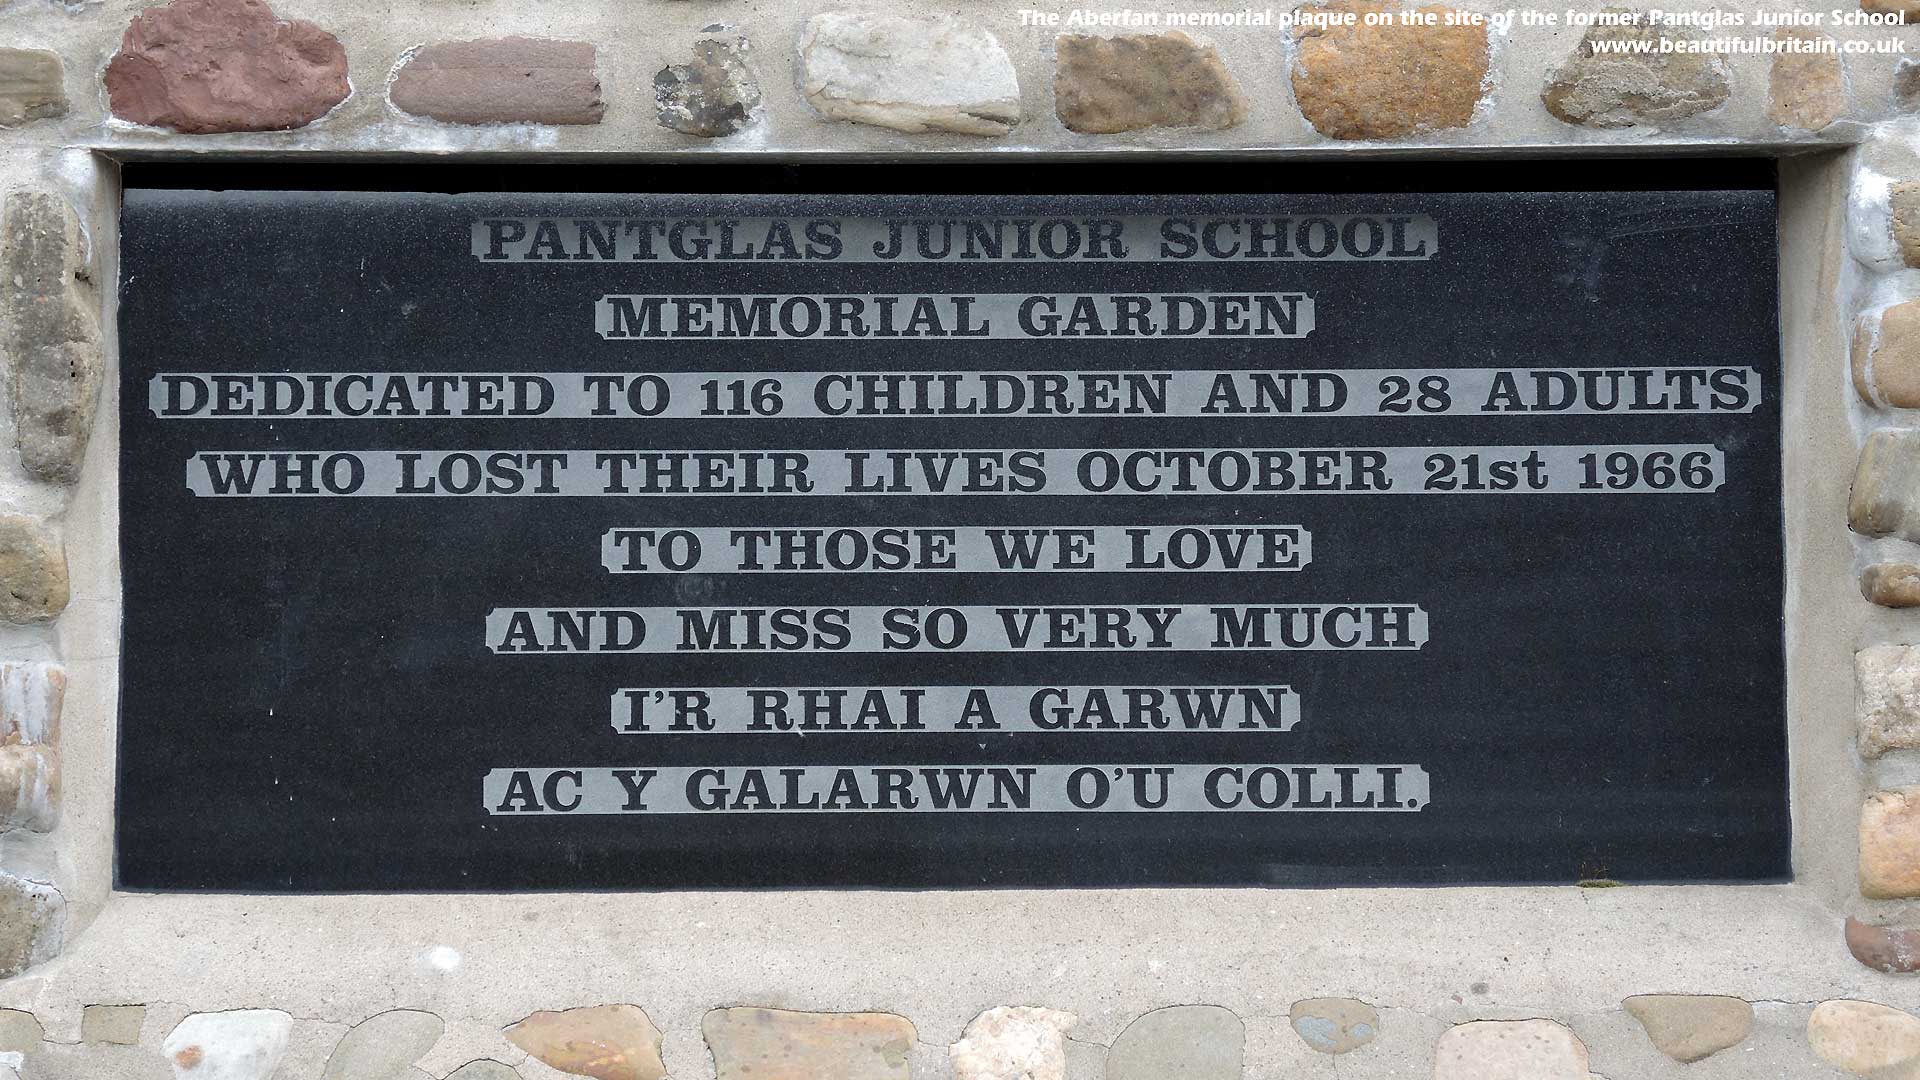 The plaque to those who died is on the wall of the former school site